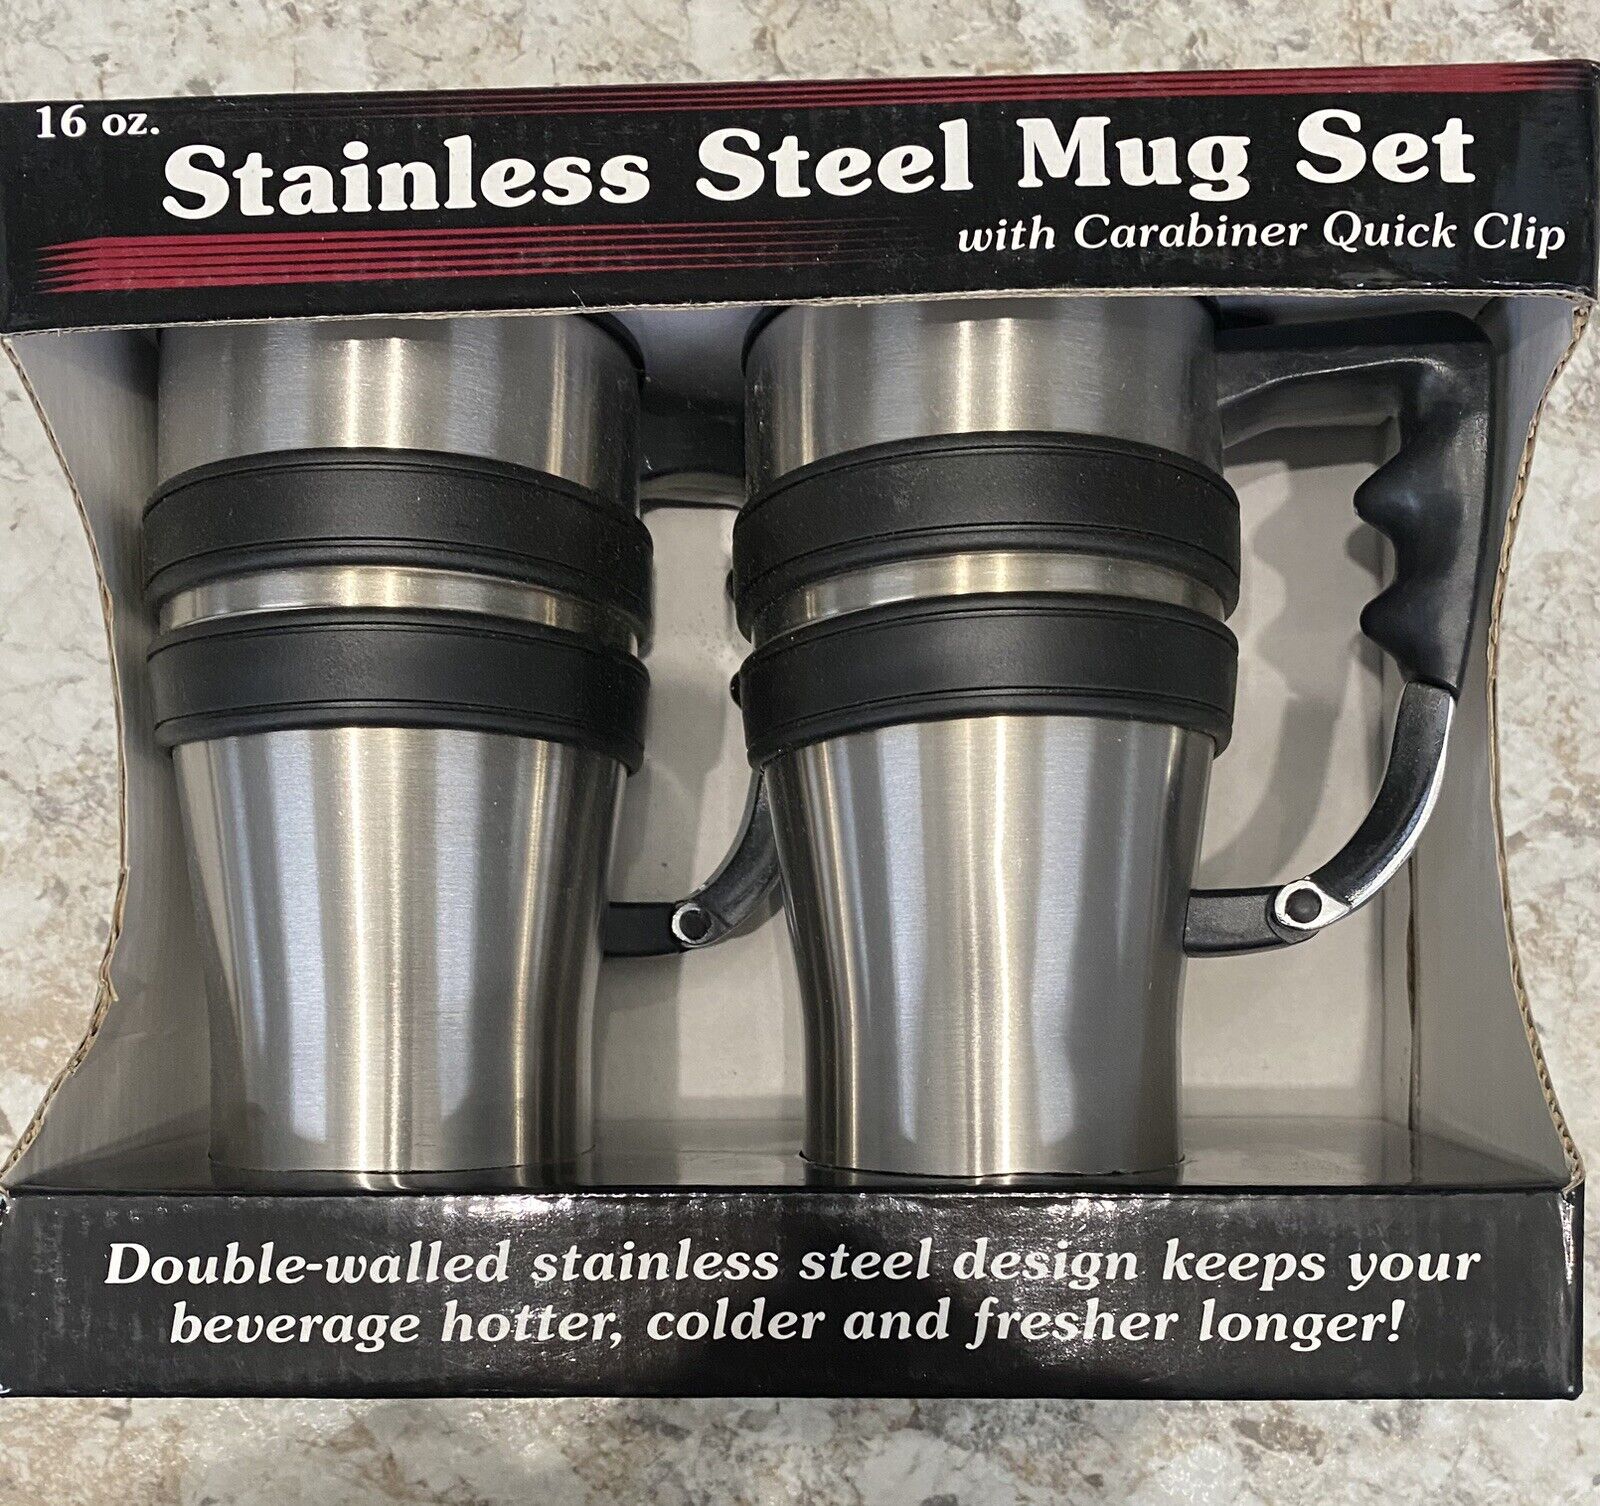 NEW 2 Carabiner Travel Mugs Stainless Steel Double Wall 16 oz SS Set Quick Clip